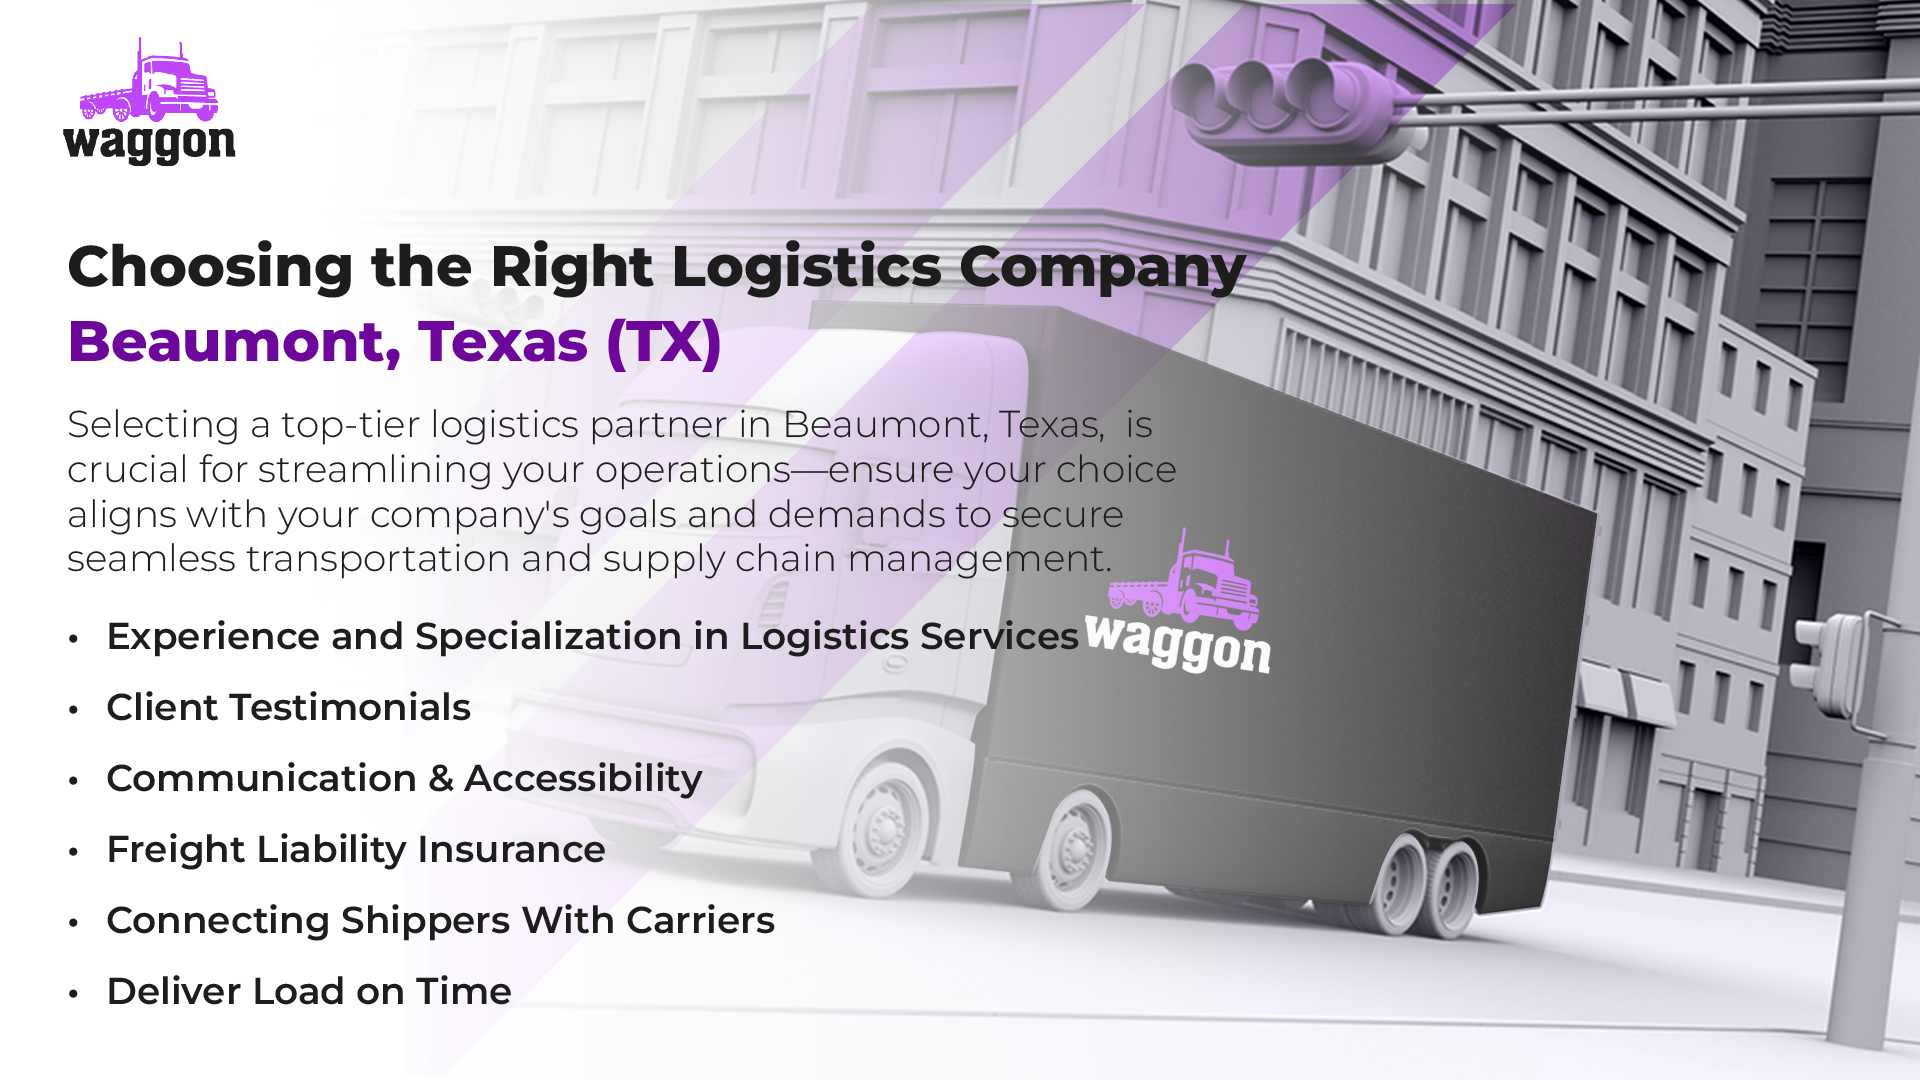 Choosing the Right Logistics Company in Beaumont, Texas (TX)